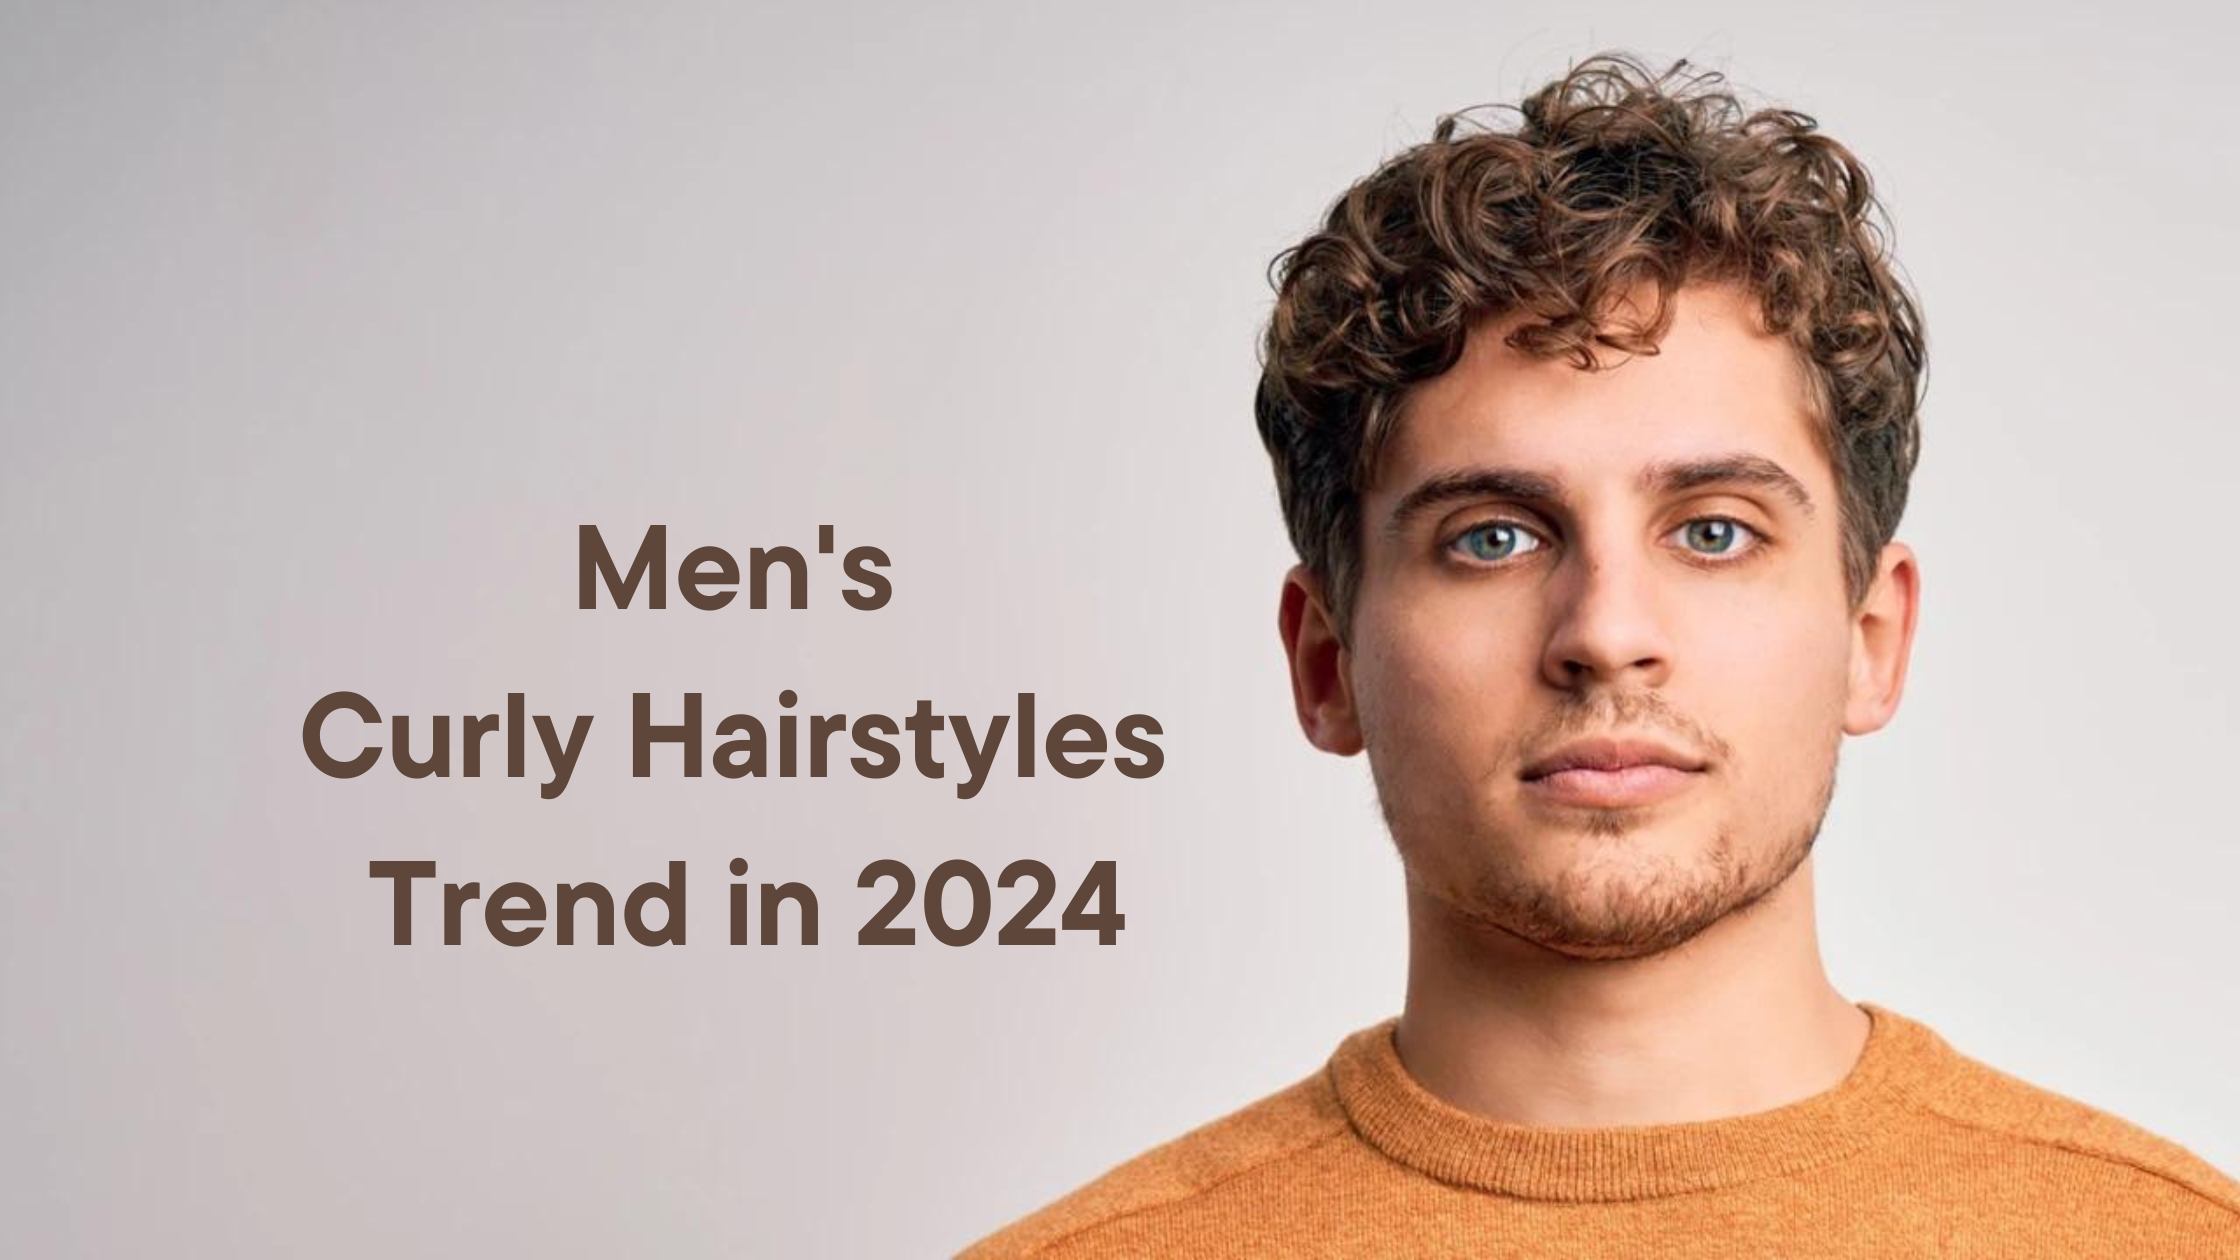 Men s Curly Hairstyles Trend in 2024 1